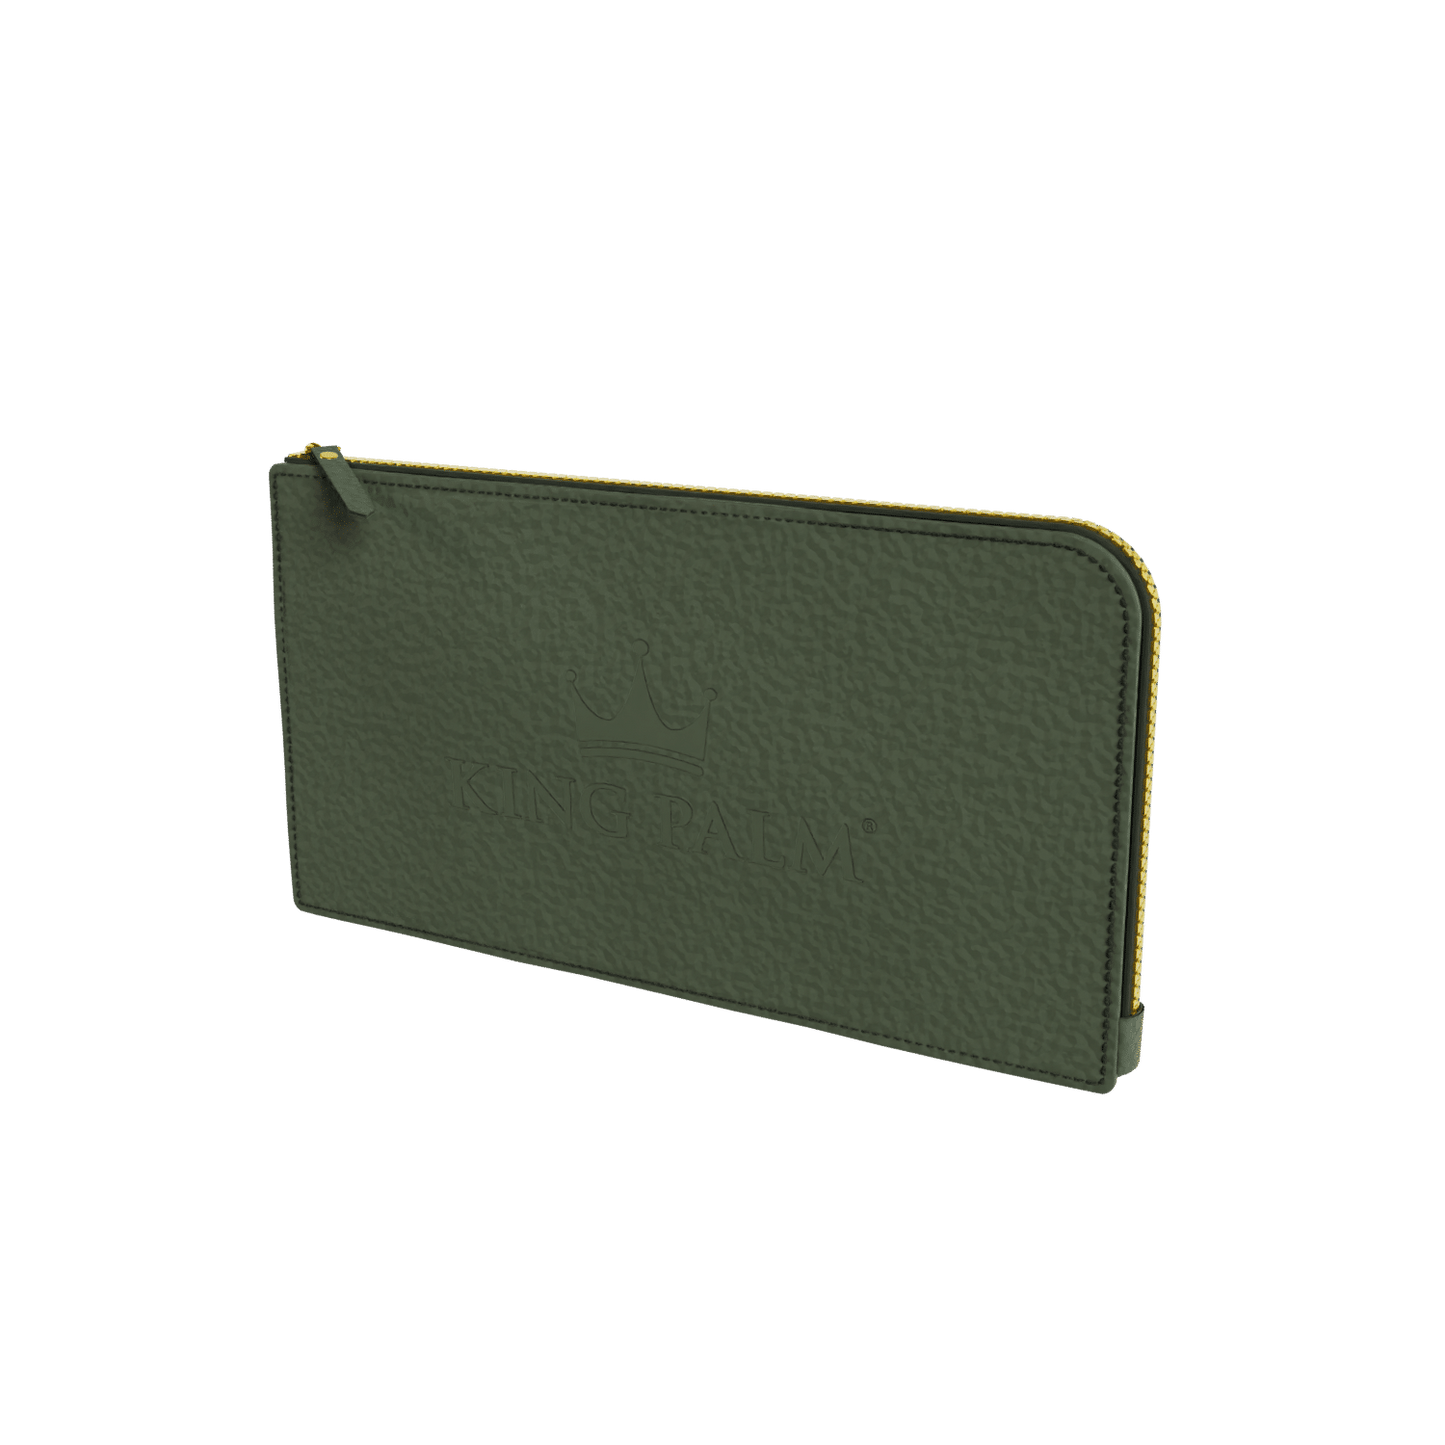 Leather Pouch King Palm Best Sales Price - Accessories